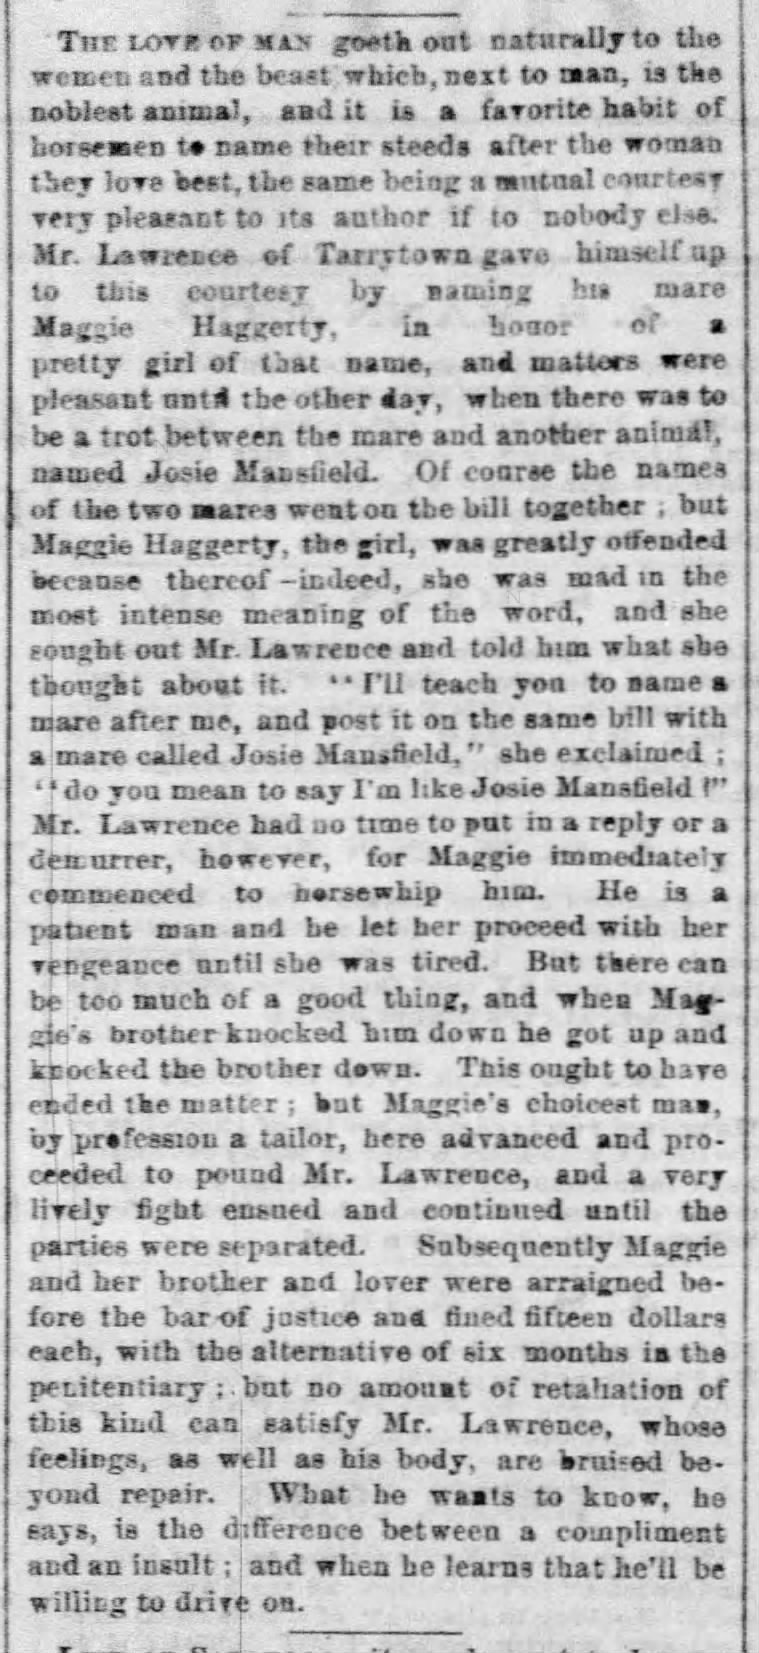 MR. LAWRENCE NAMES HORSE AFTER A WOMAN. 1872